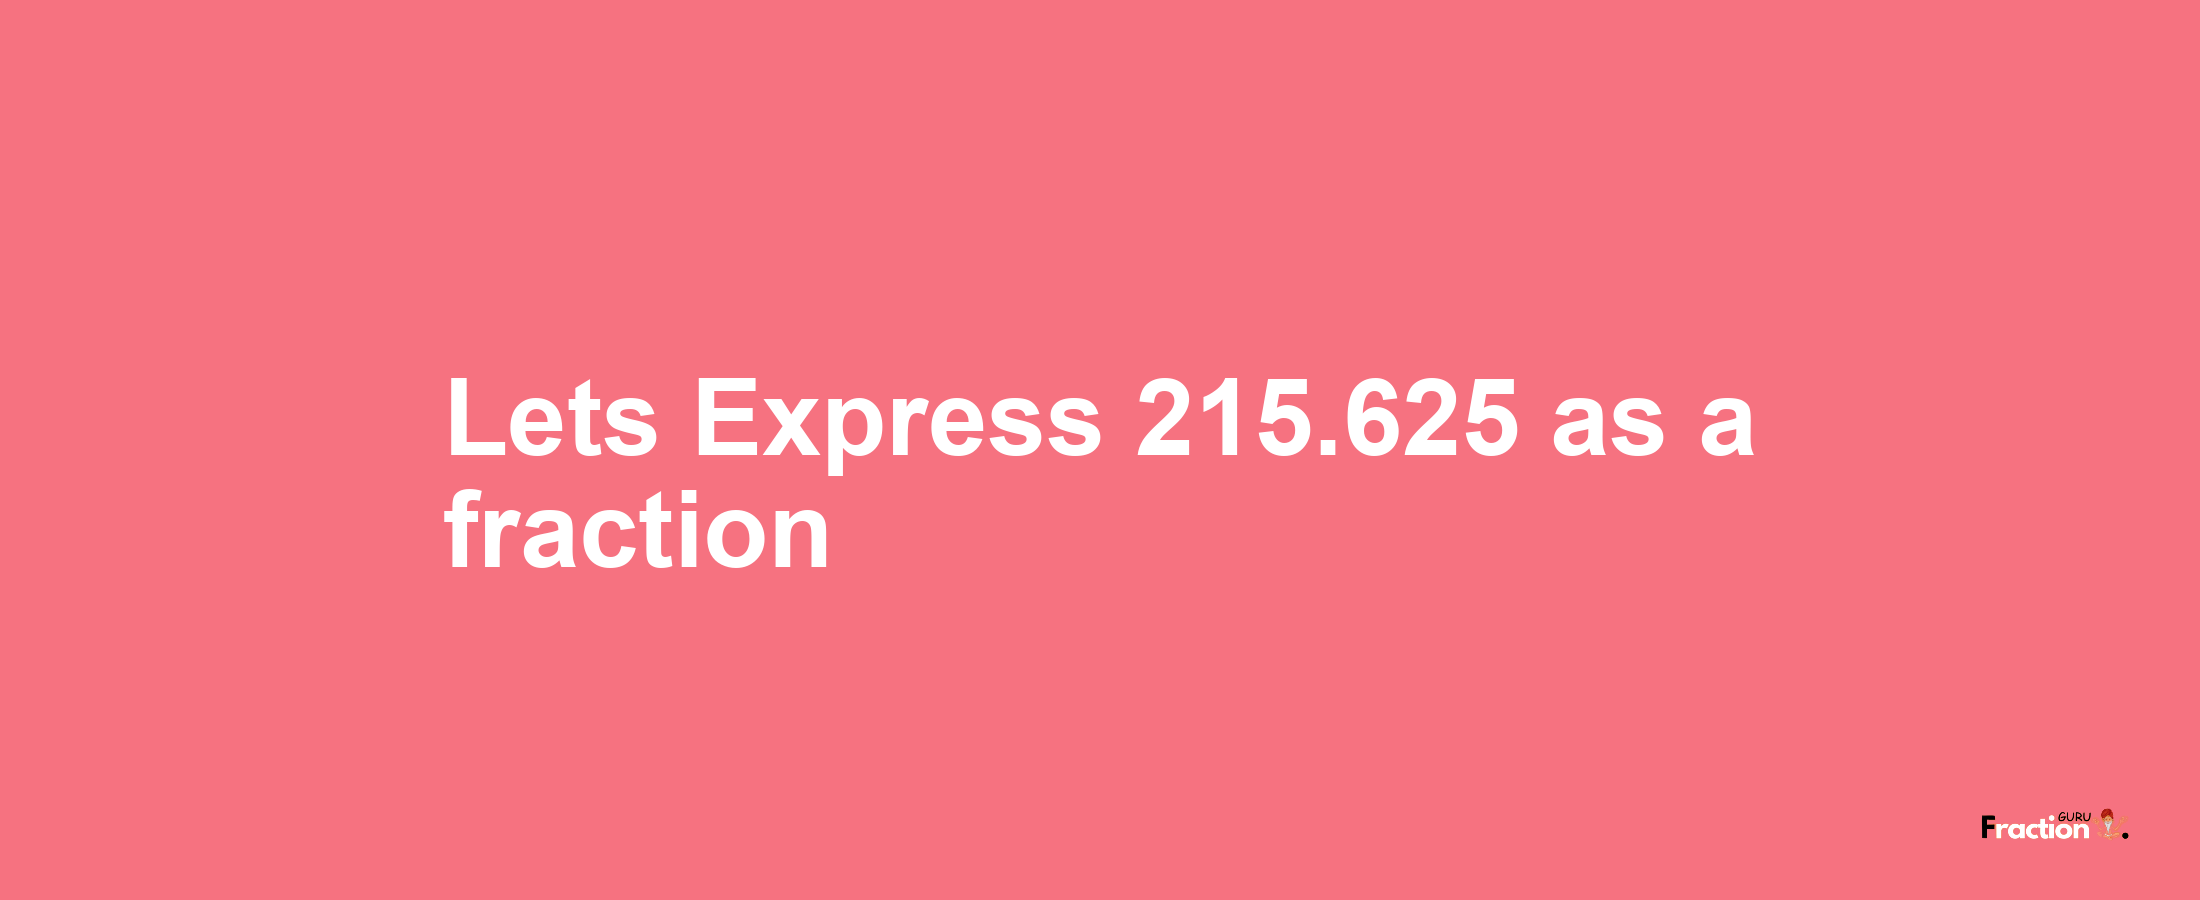 Lets Express 215.625 as afraction